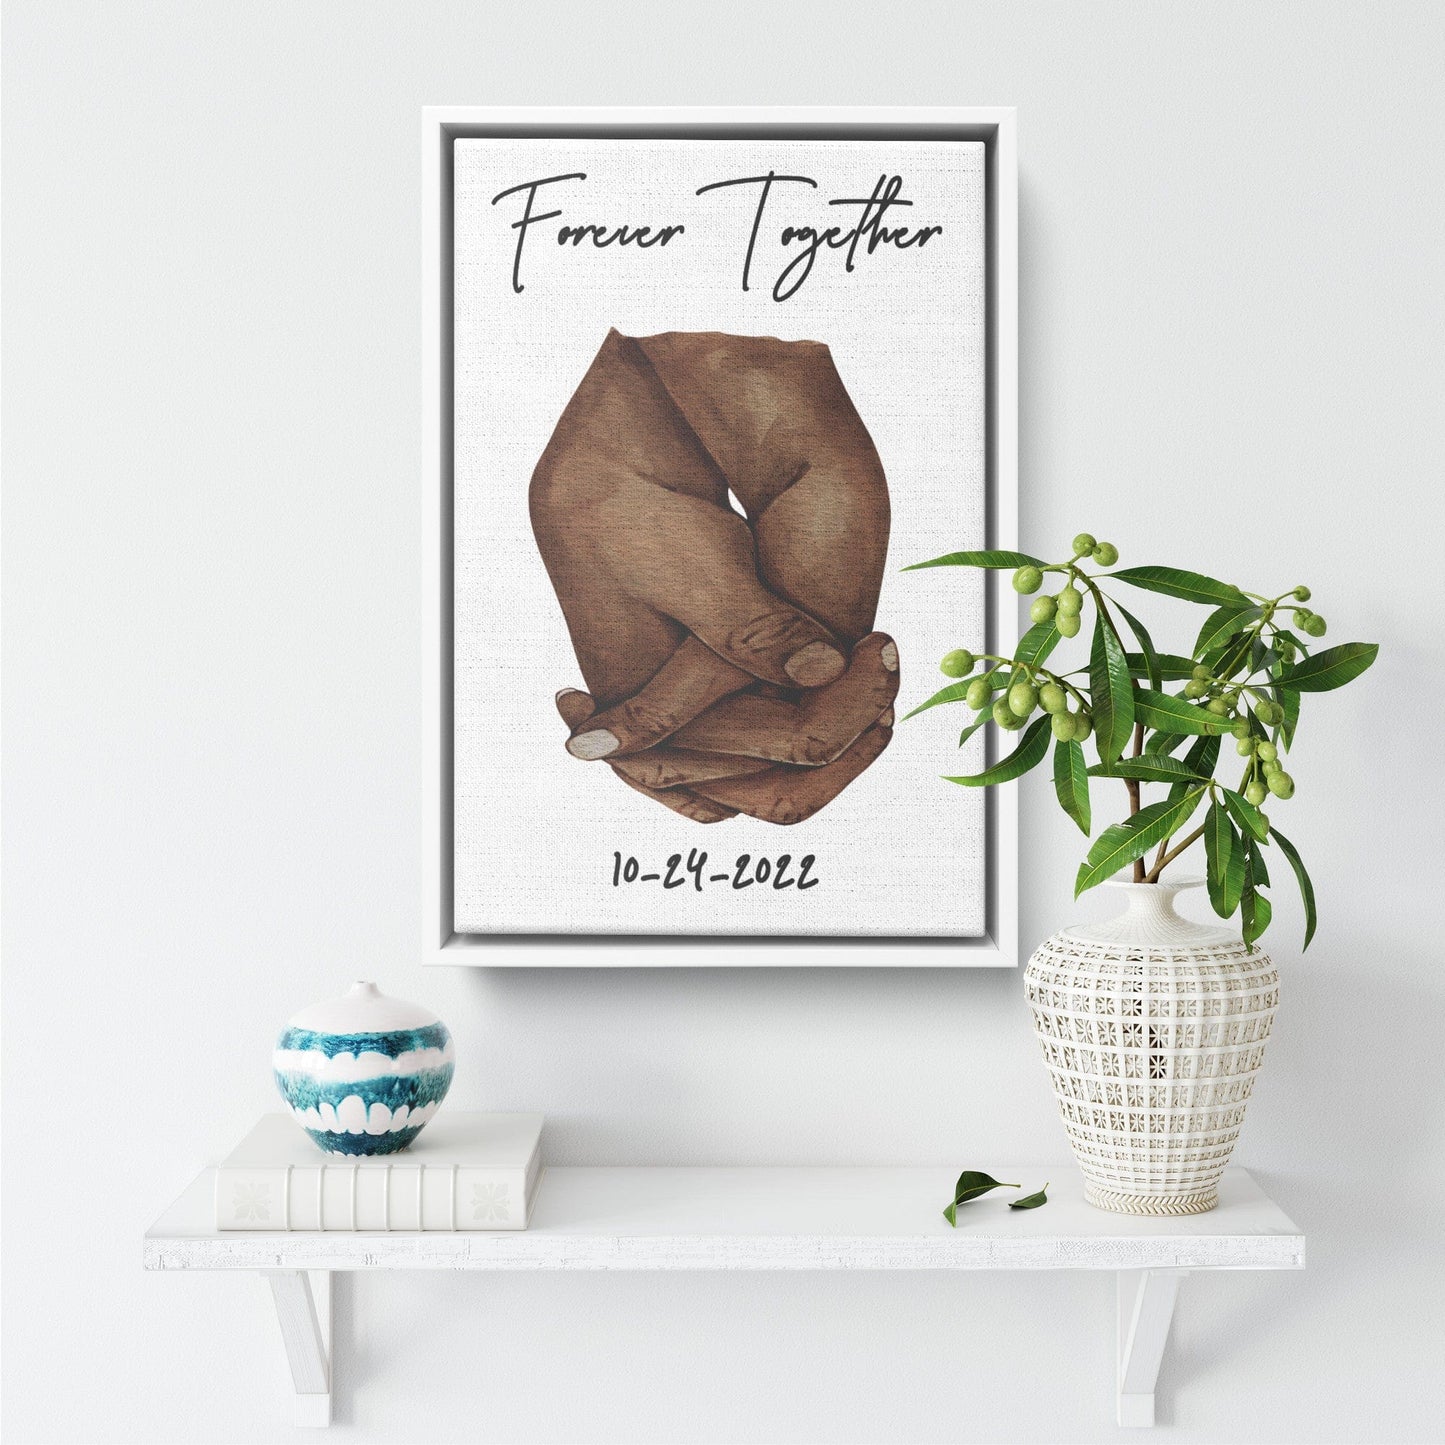 Forever Together Framed Canvas Couple Holding Hands, Personalized Gifts